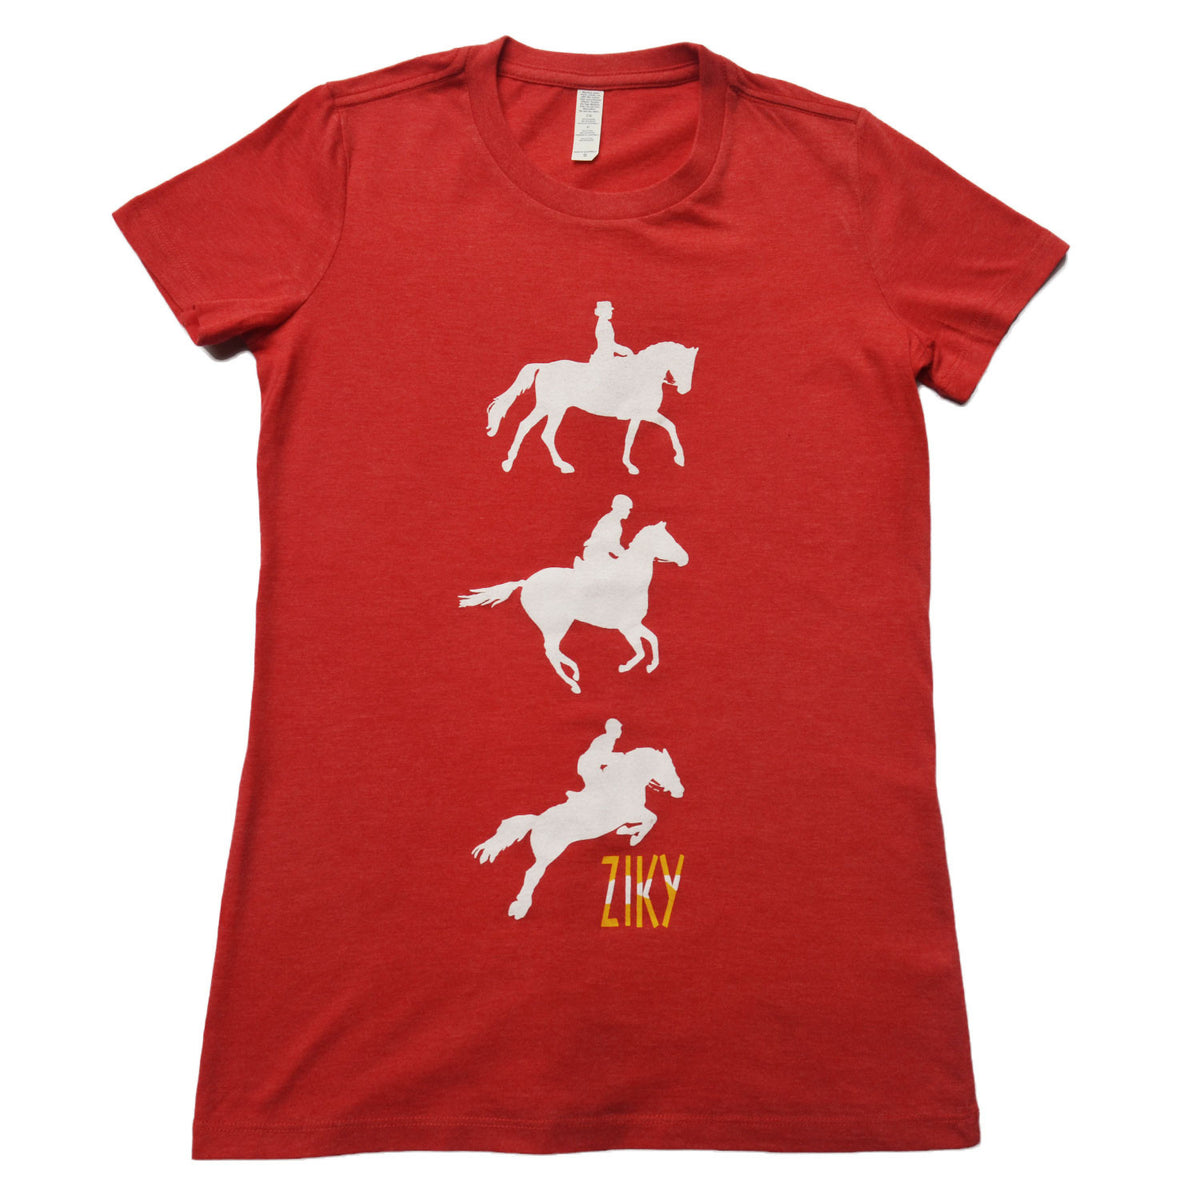 Red equestrian eventing shirt